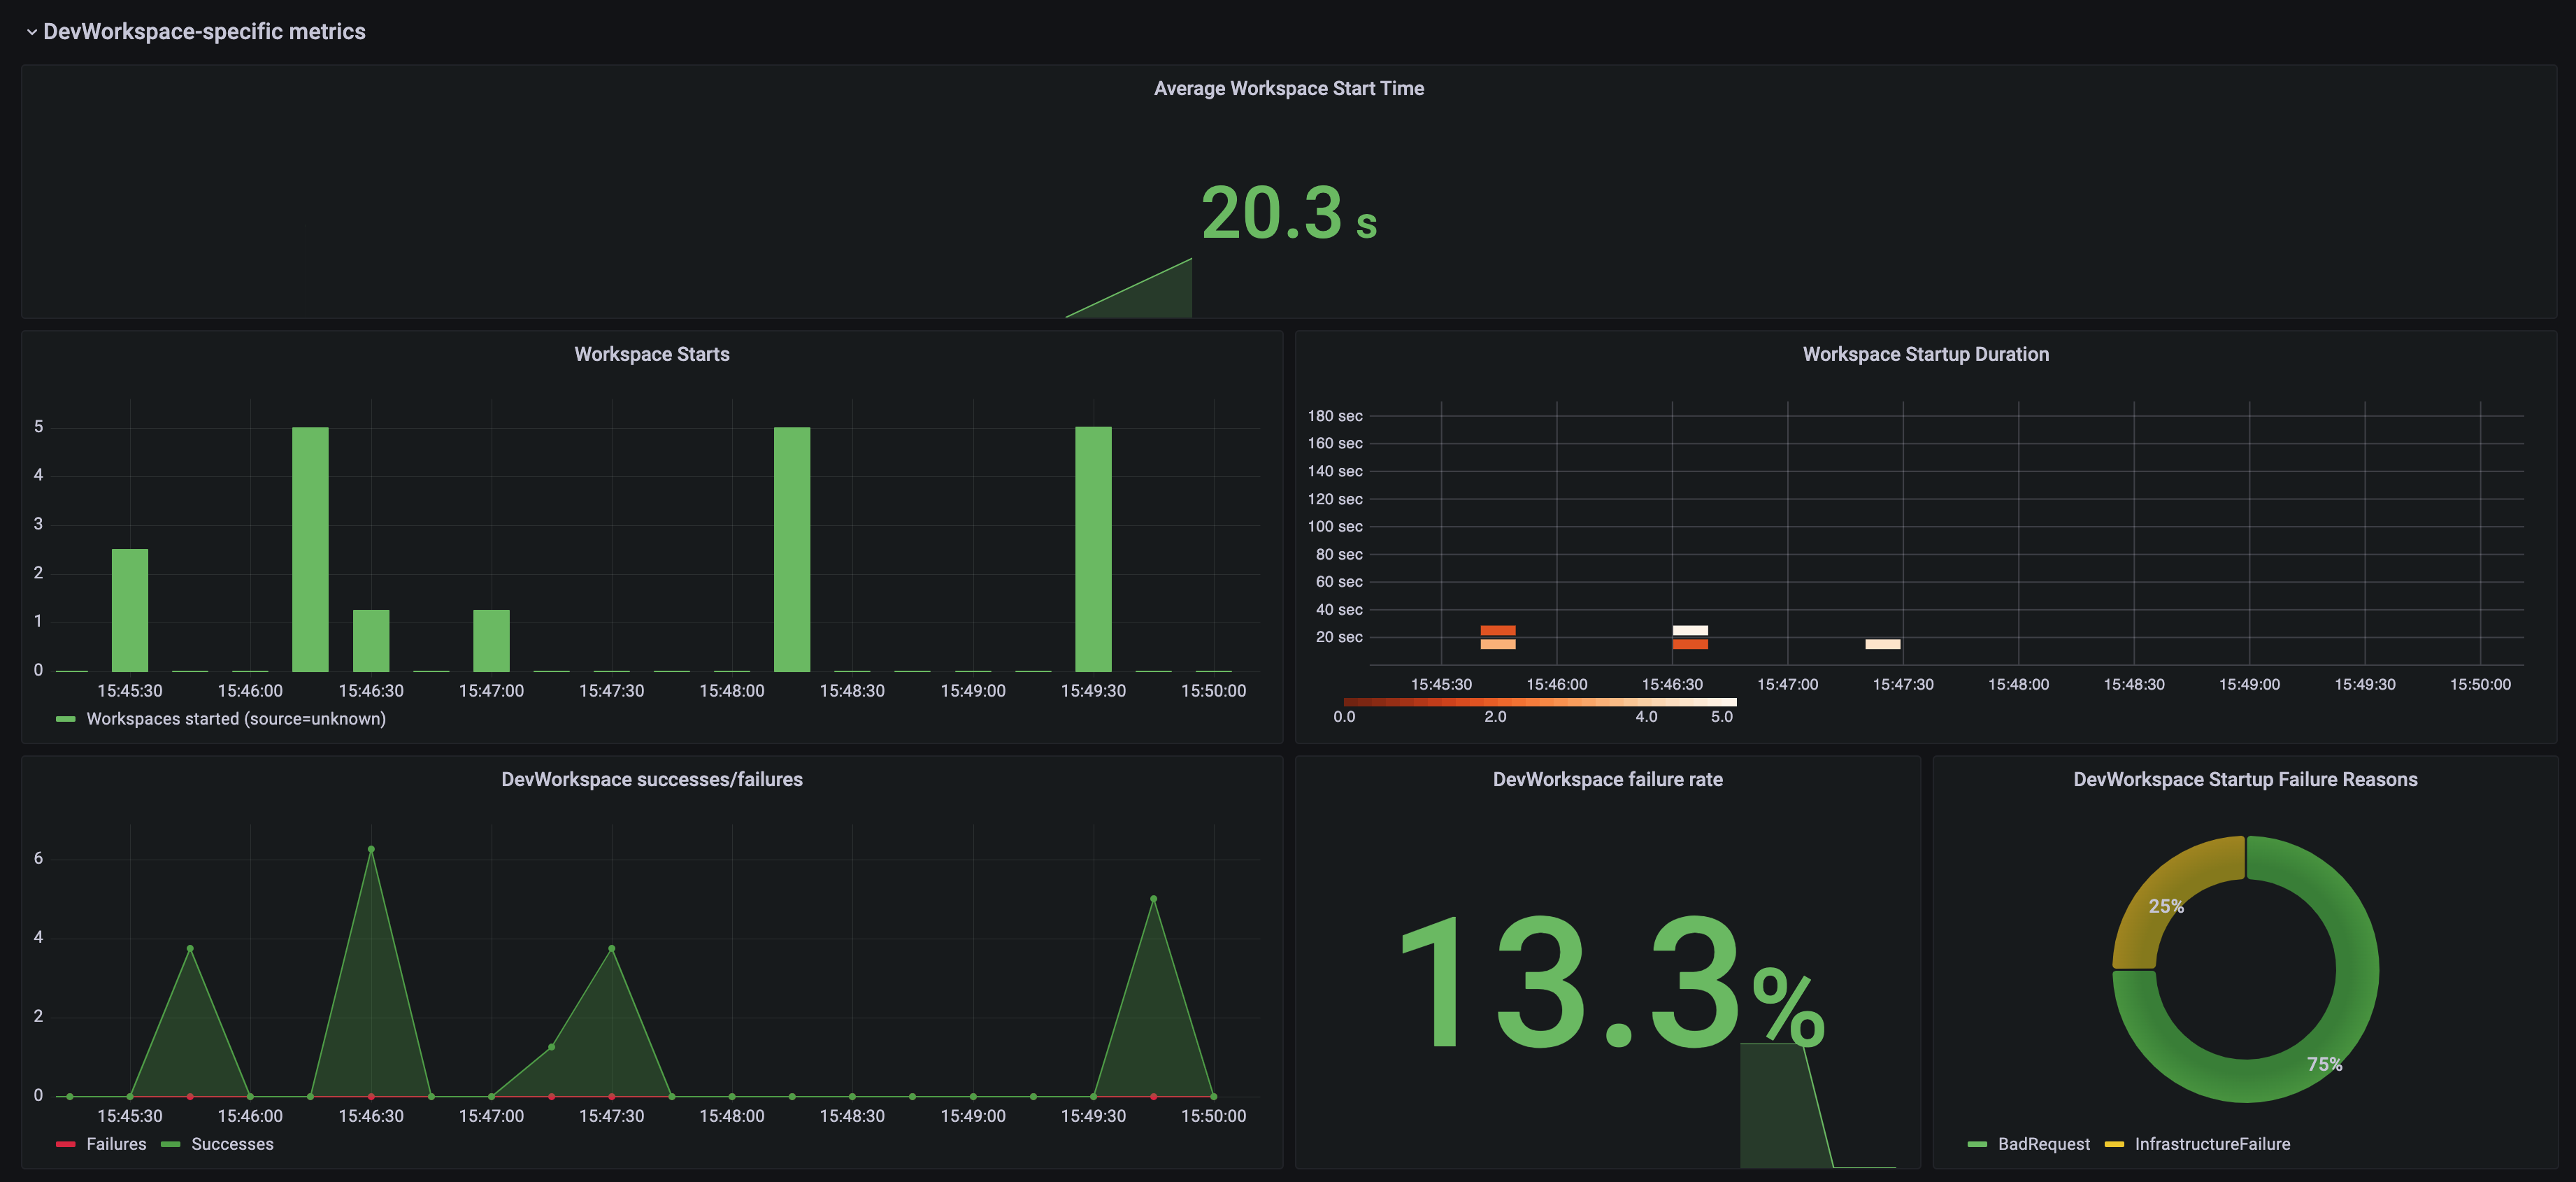 Grafana dashboard panels that contain metrics related to `DevWorkspace startup